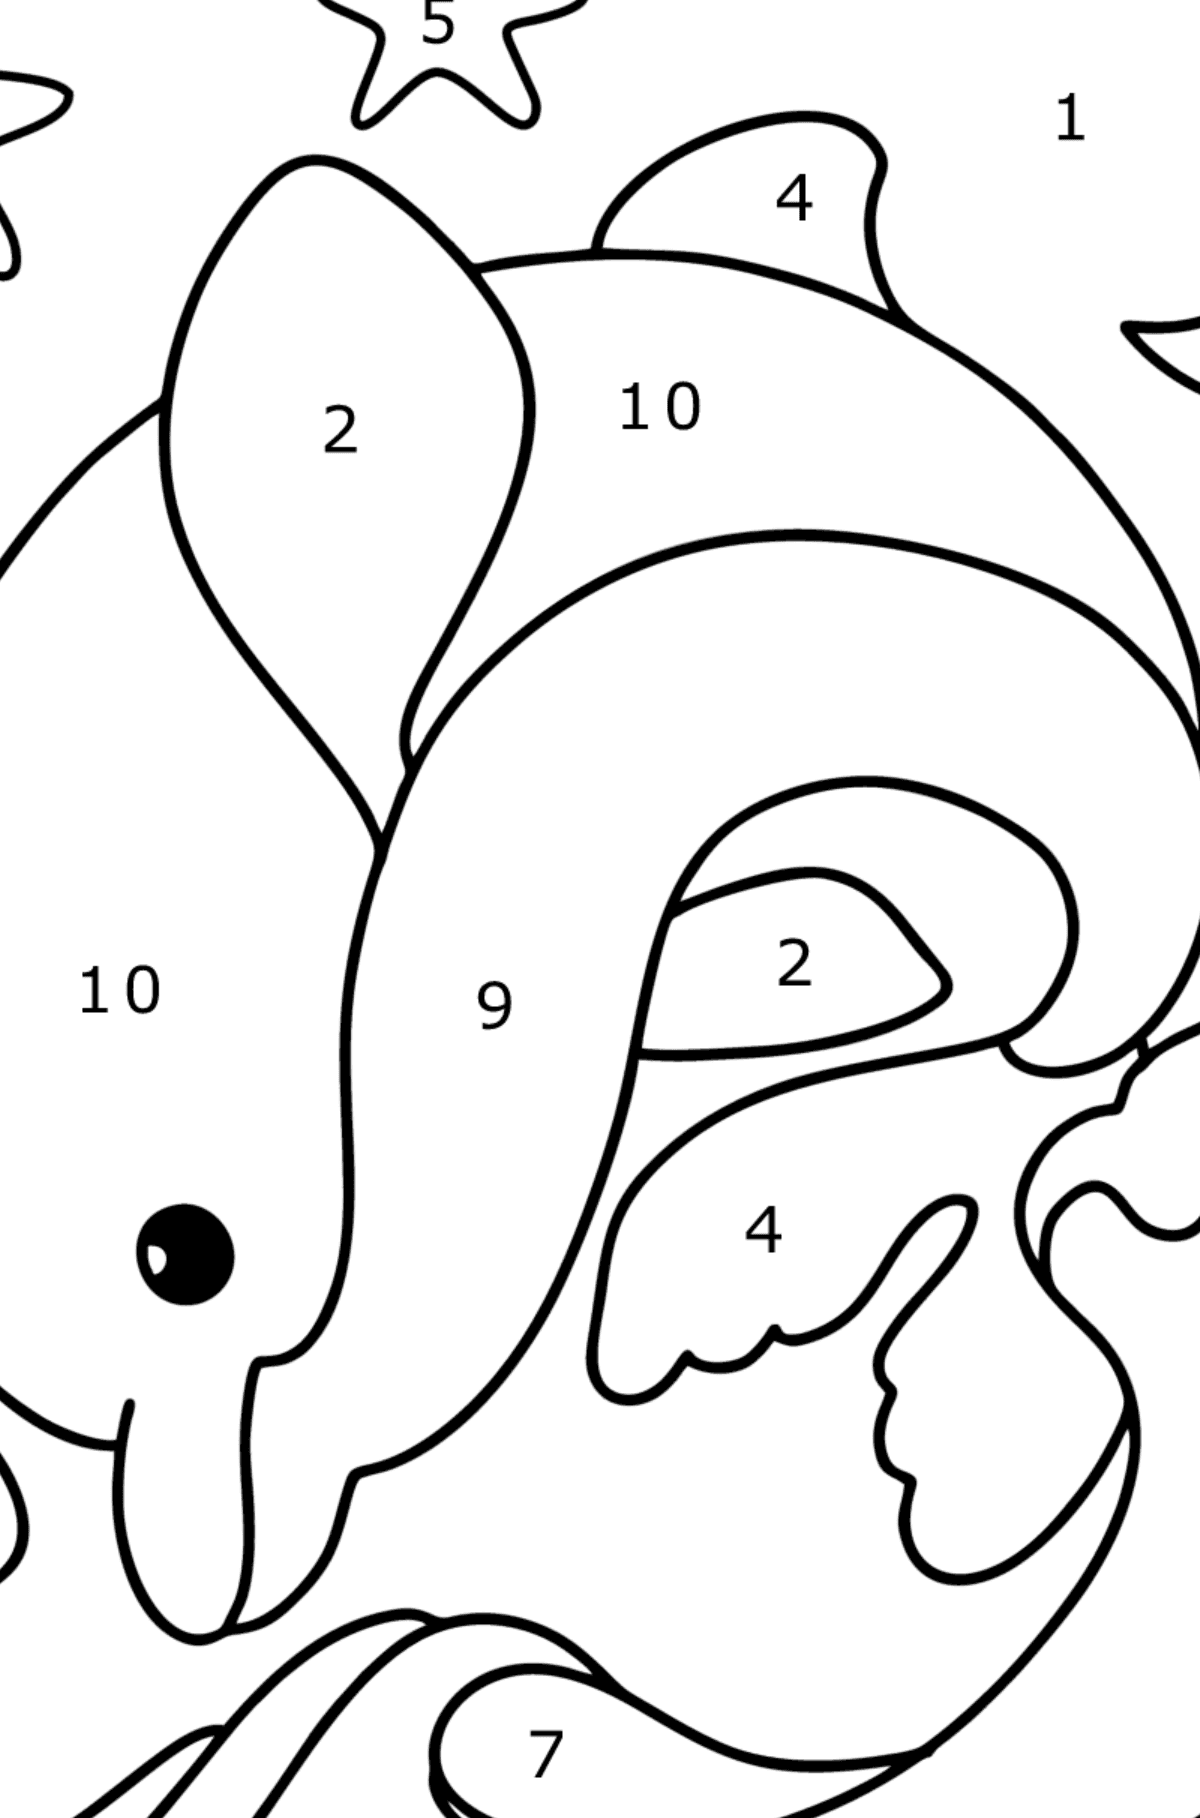 Dolphin in the Sea coloring page - Coloring by Numbers for Kids